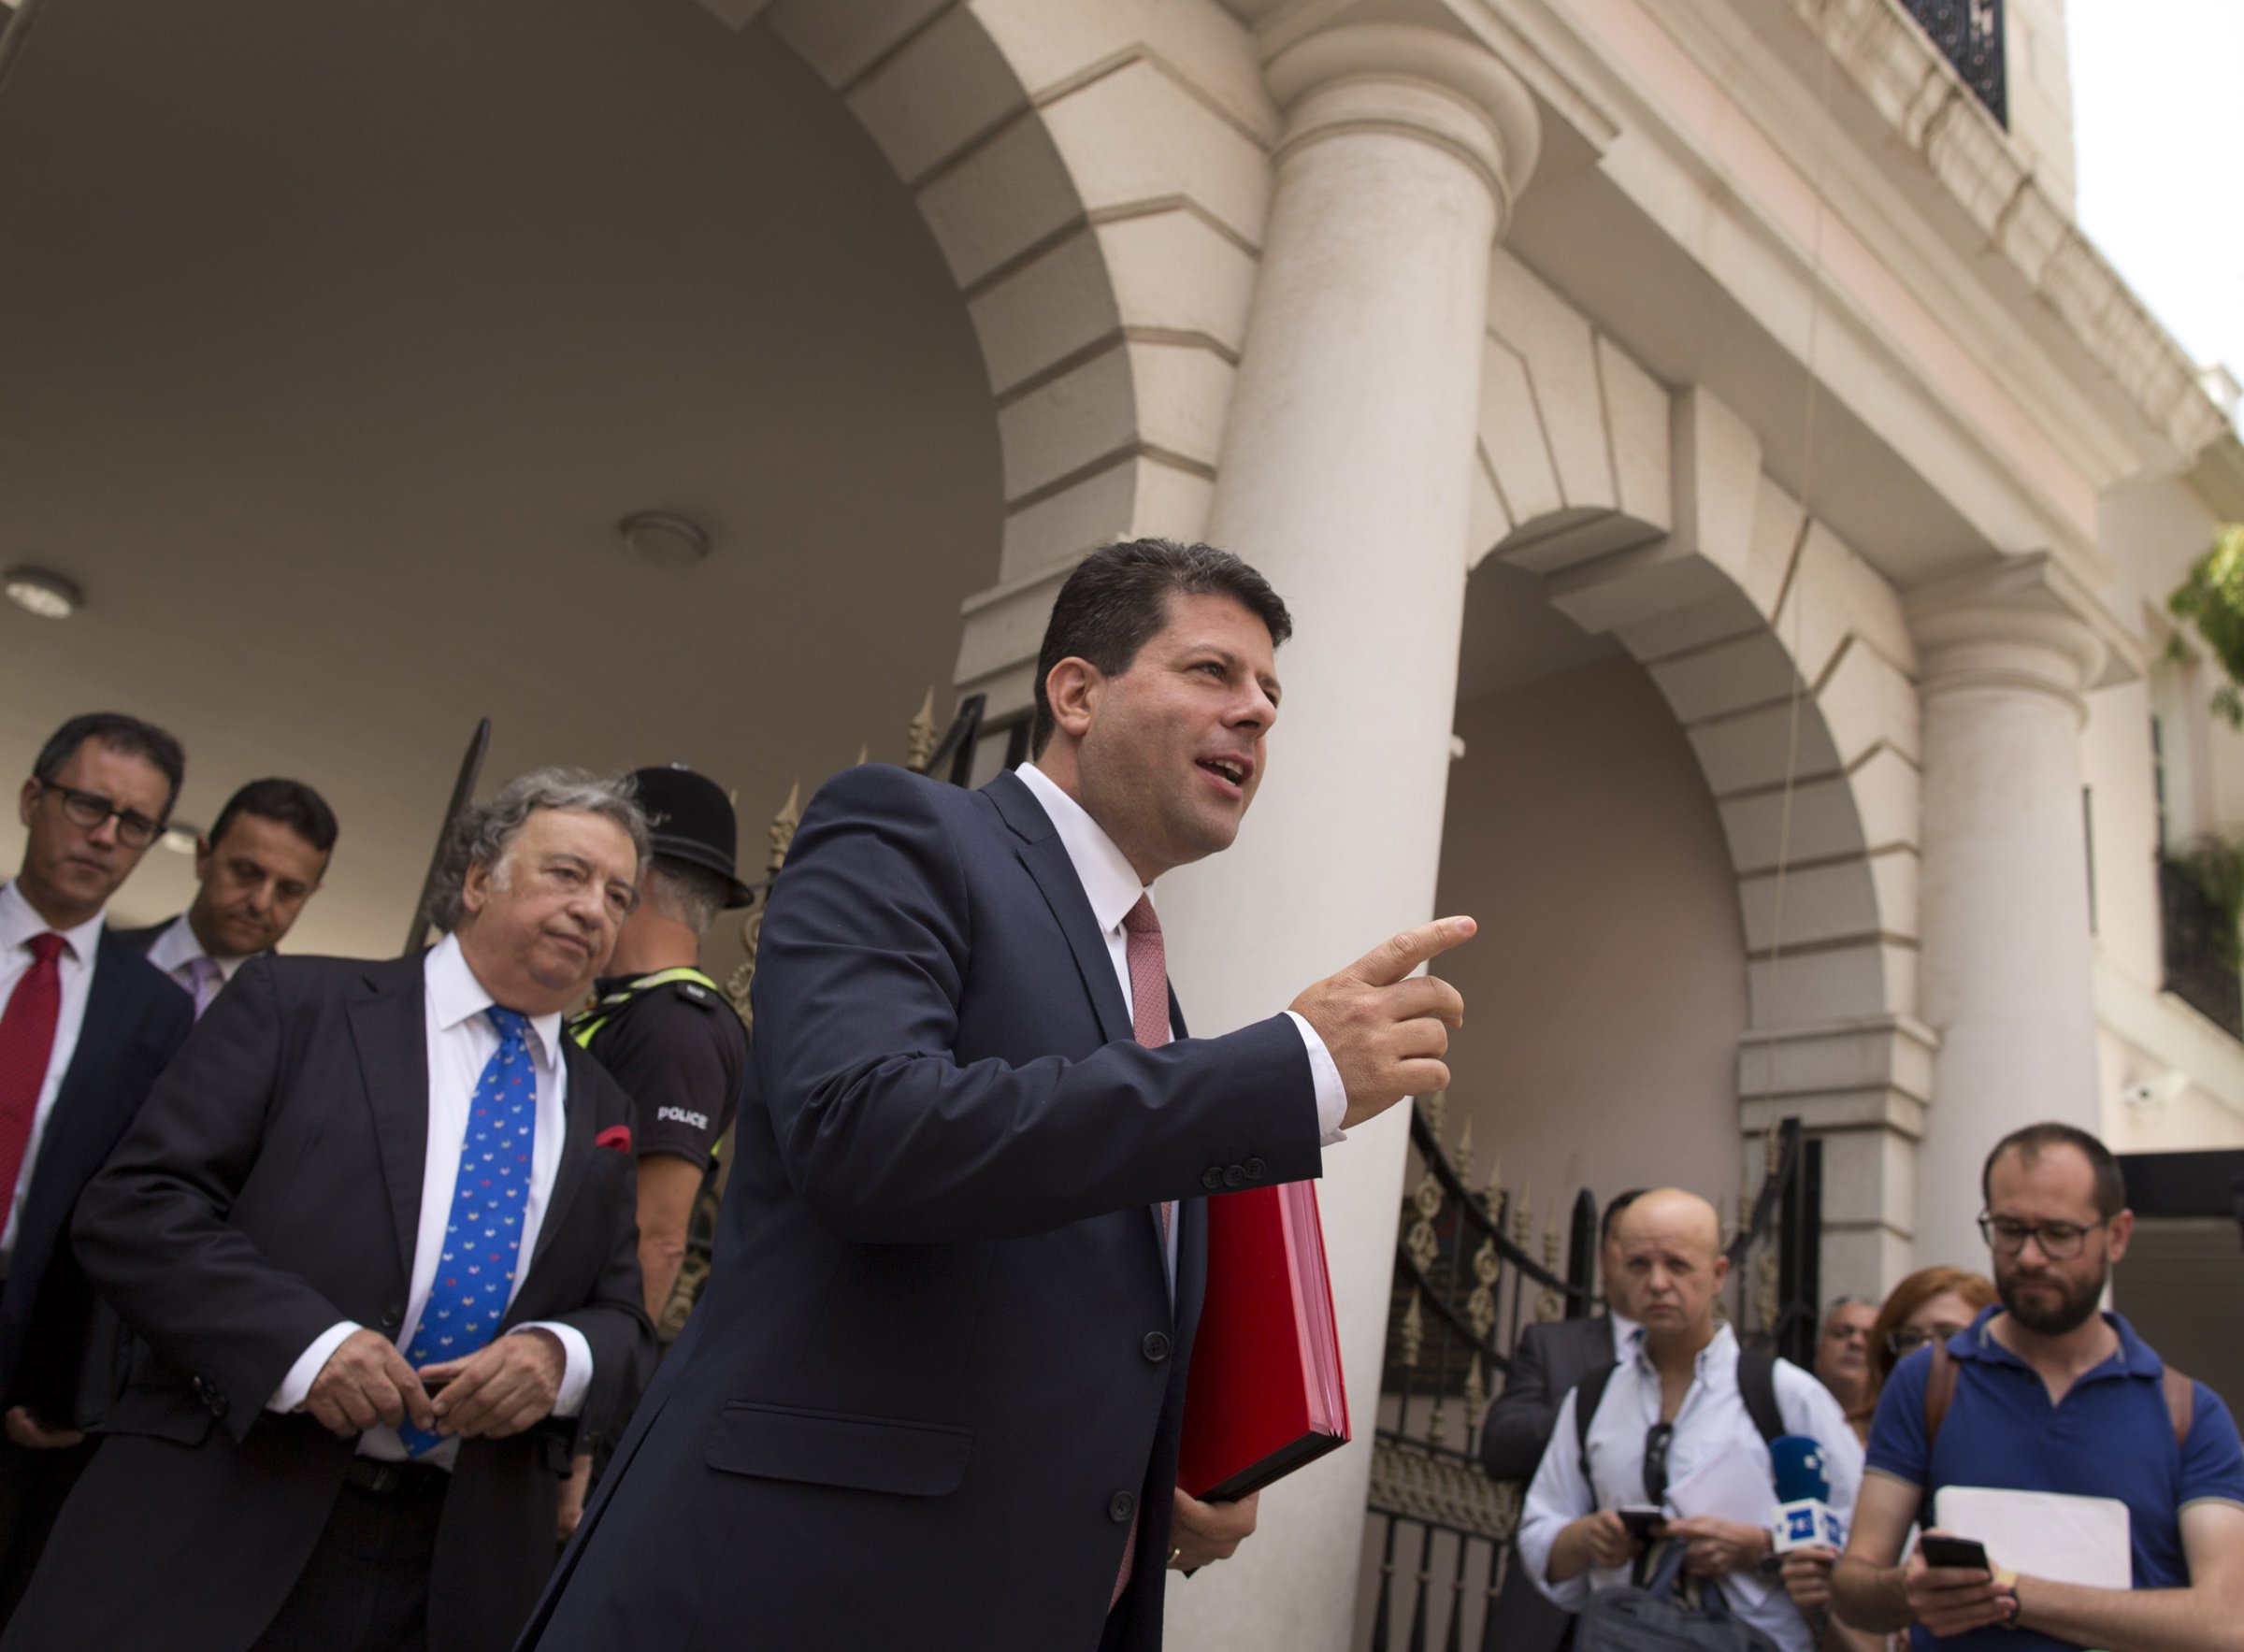 Chief Minister of Gibraltar Fabian Picardo (C) gestures a she leaves after a meeting with members of the Government in Gibraltar on June 24, 2016.